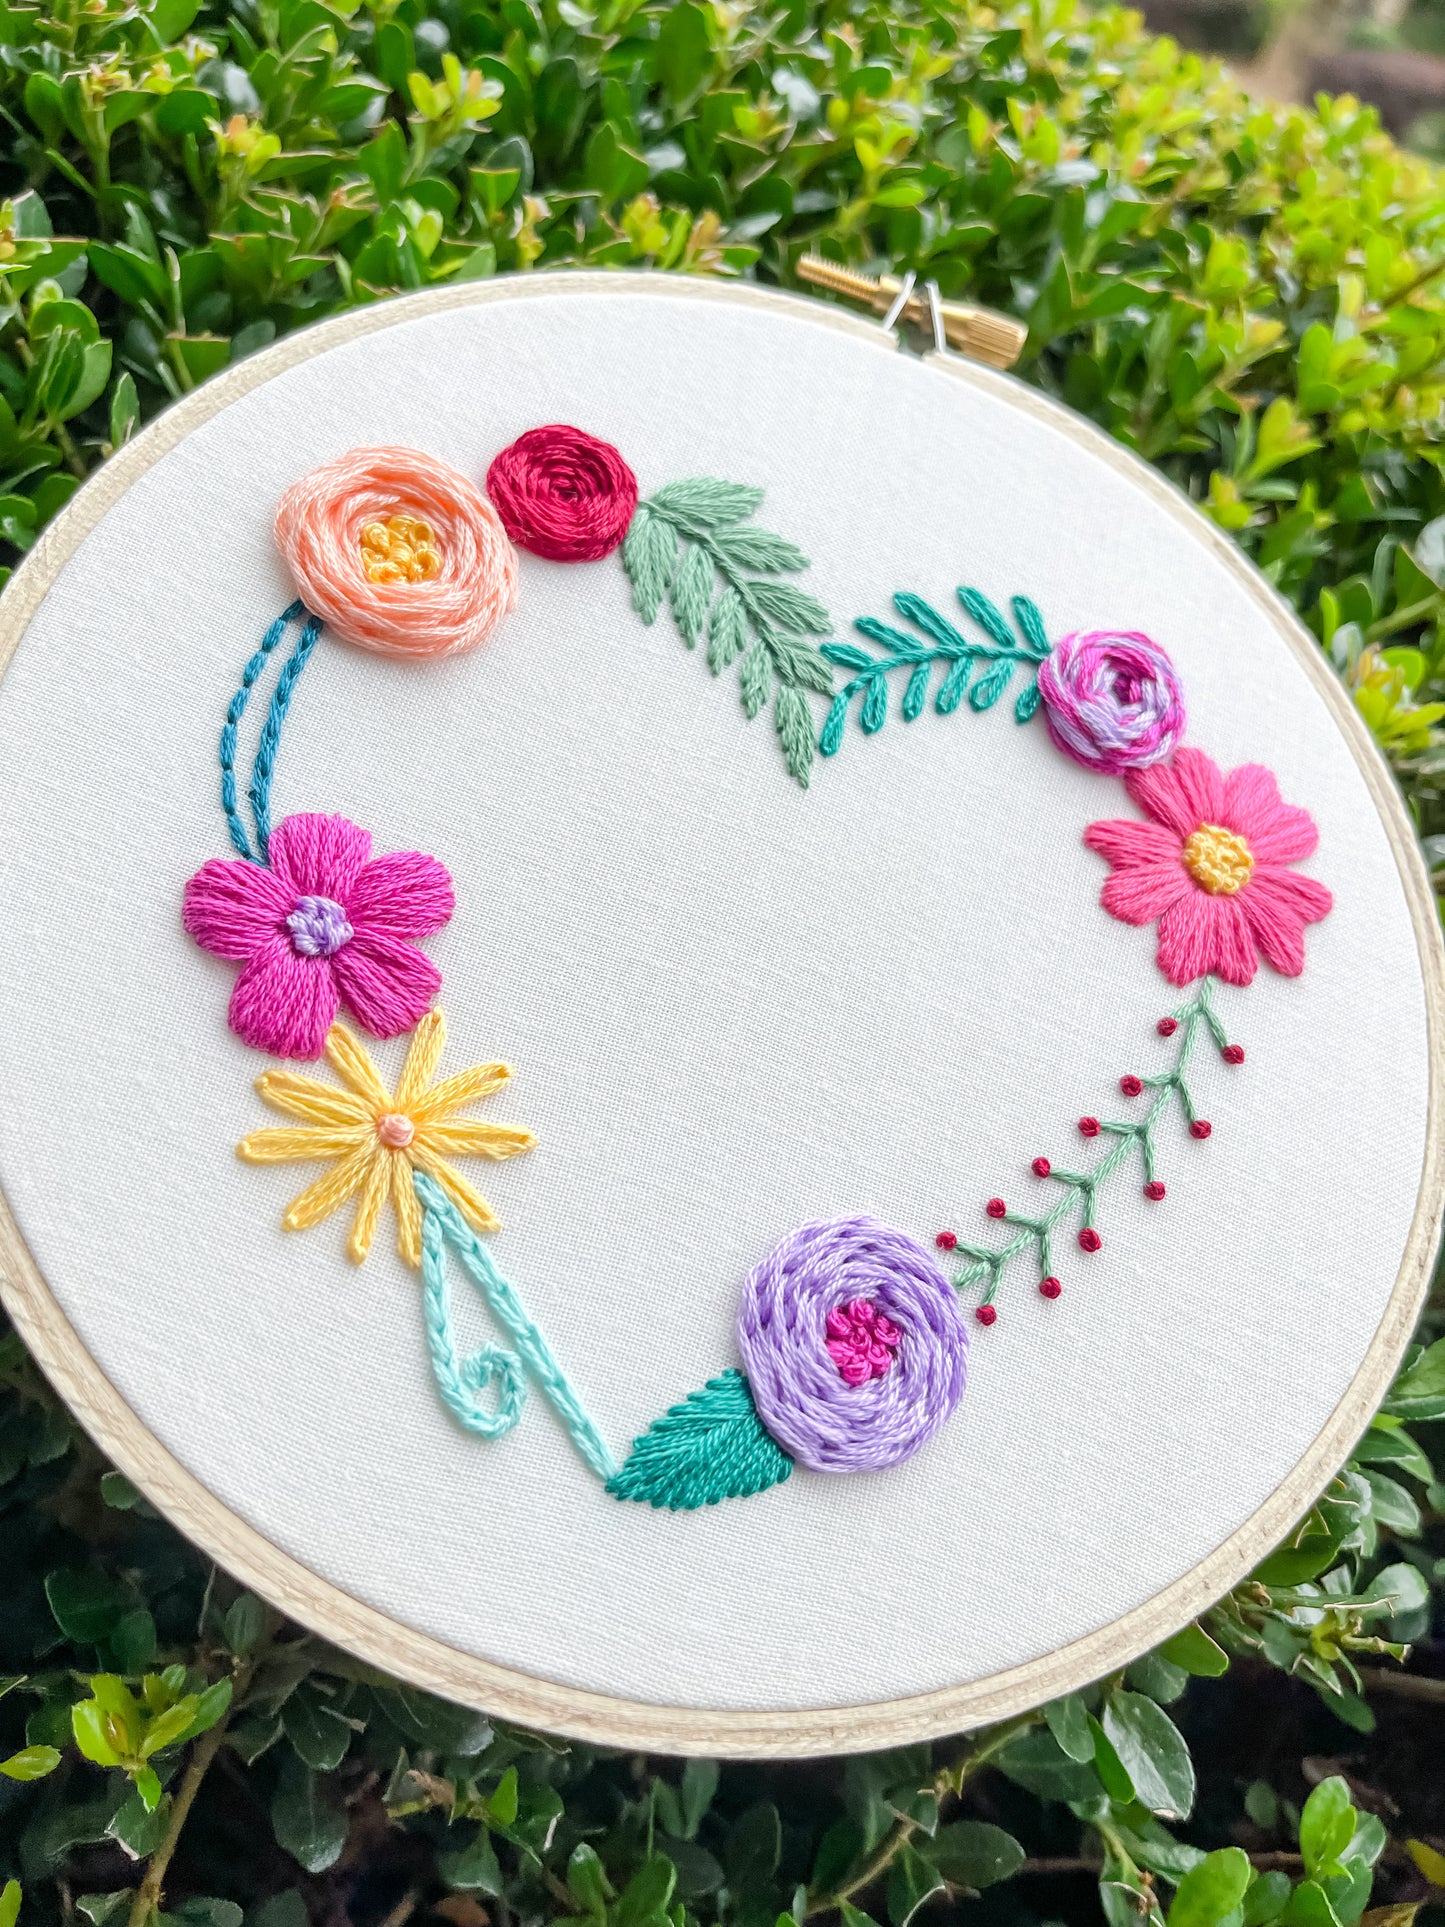 FULL KIT - Beginner's Heart Stitch Sampler/Stitch Along - DIY Embroidery Kit, Floral Embroidery, Embroidery Pattern